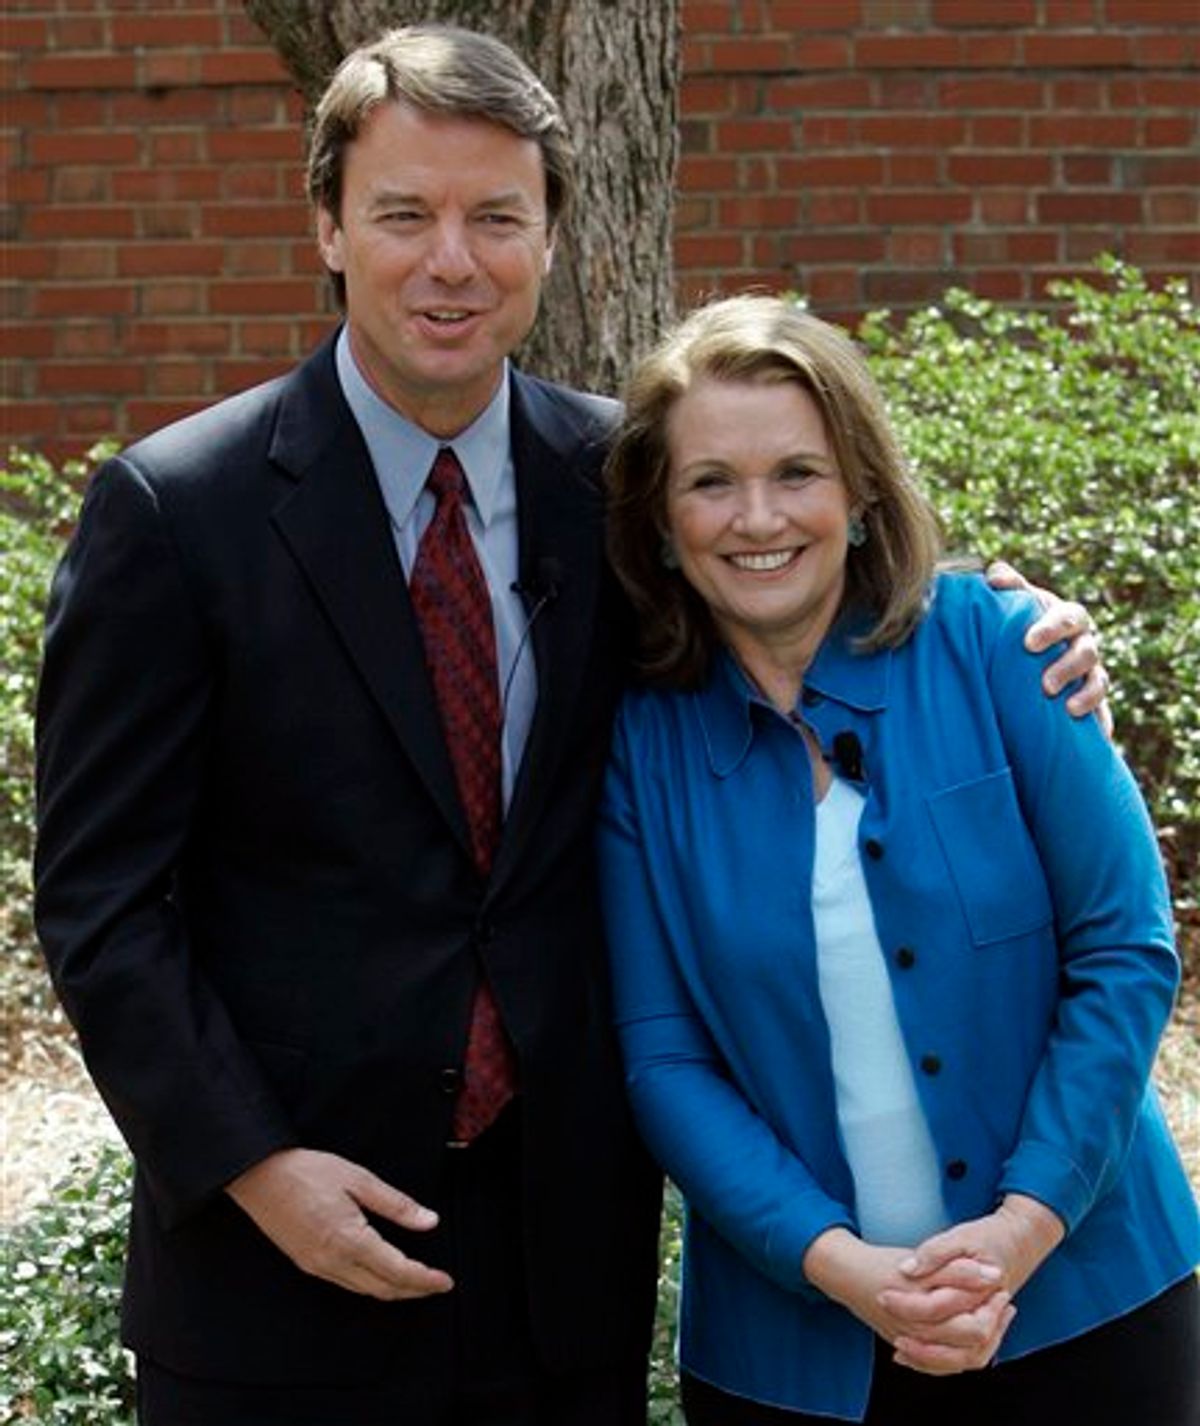 FILE - This March 22, 2007 file photo shows two-time presidential candidate John Edwards and his wife Elizabeth during a news conference in Chapel Hill, N.C. Elizabeth Edwards has separated from her husband after a tumultuous three years in which the couple's marital troubles became tabloid fodder. A friend of Elizabeth Edwards told The Associated Press, on Wednesday, Jan. 27, 2010, that the couple has separated.  (AP Photo/Gerry Broome, file) (AP)